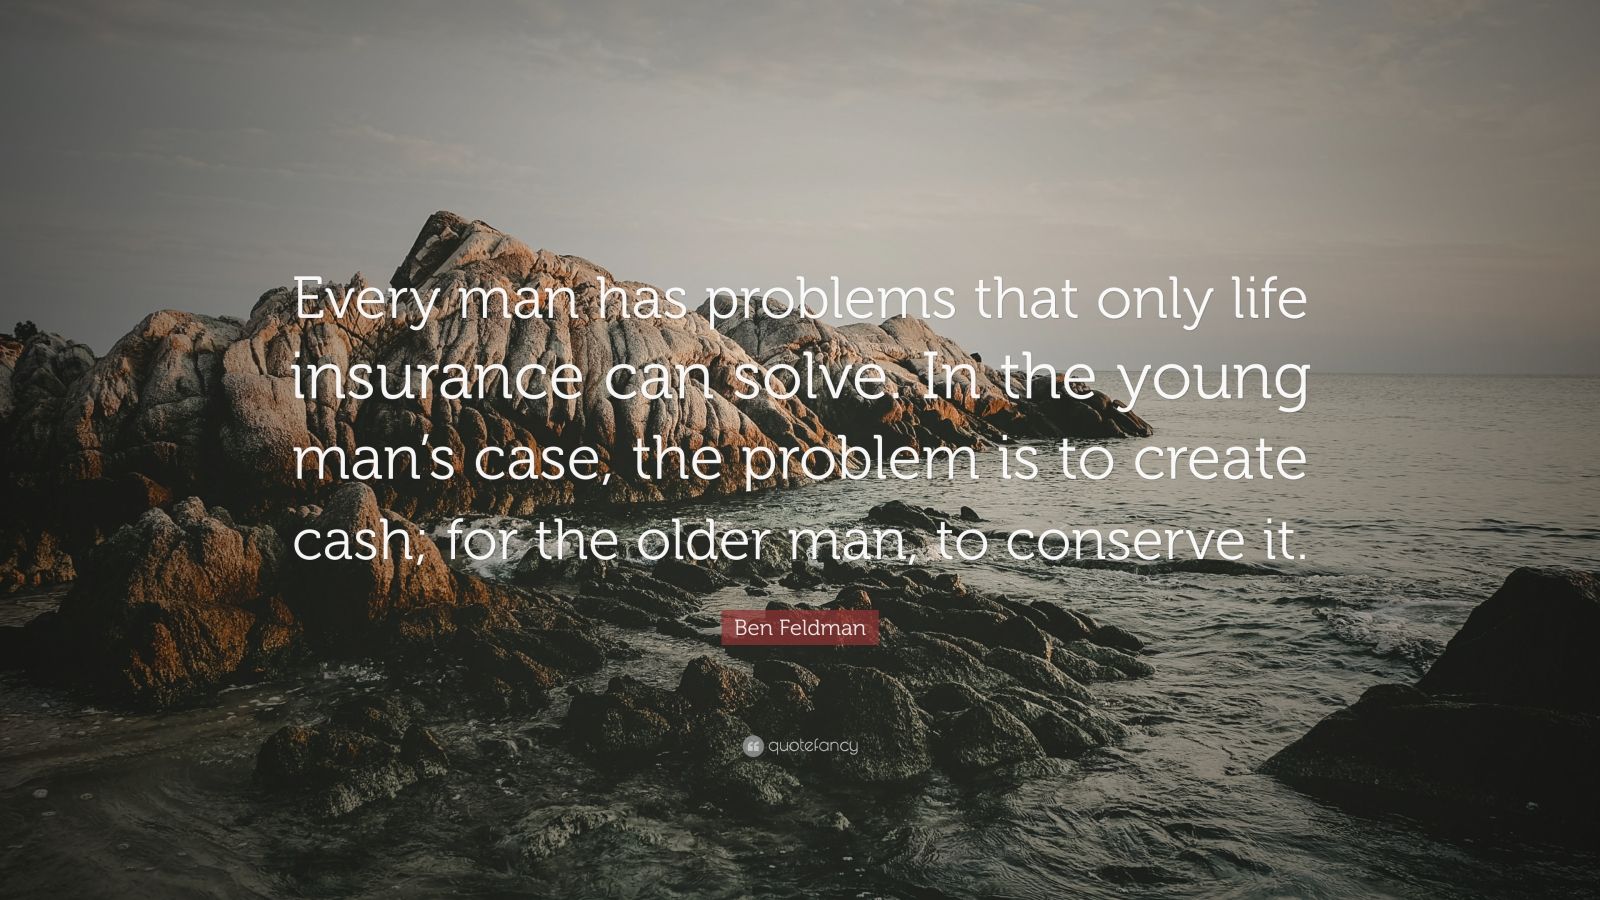 Ben Feldman Quote: "Every man has problems that only life insurance can solve. In the young man ...